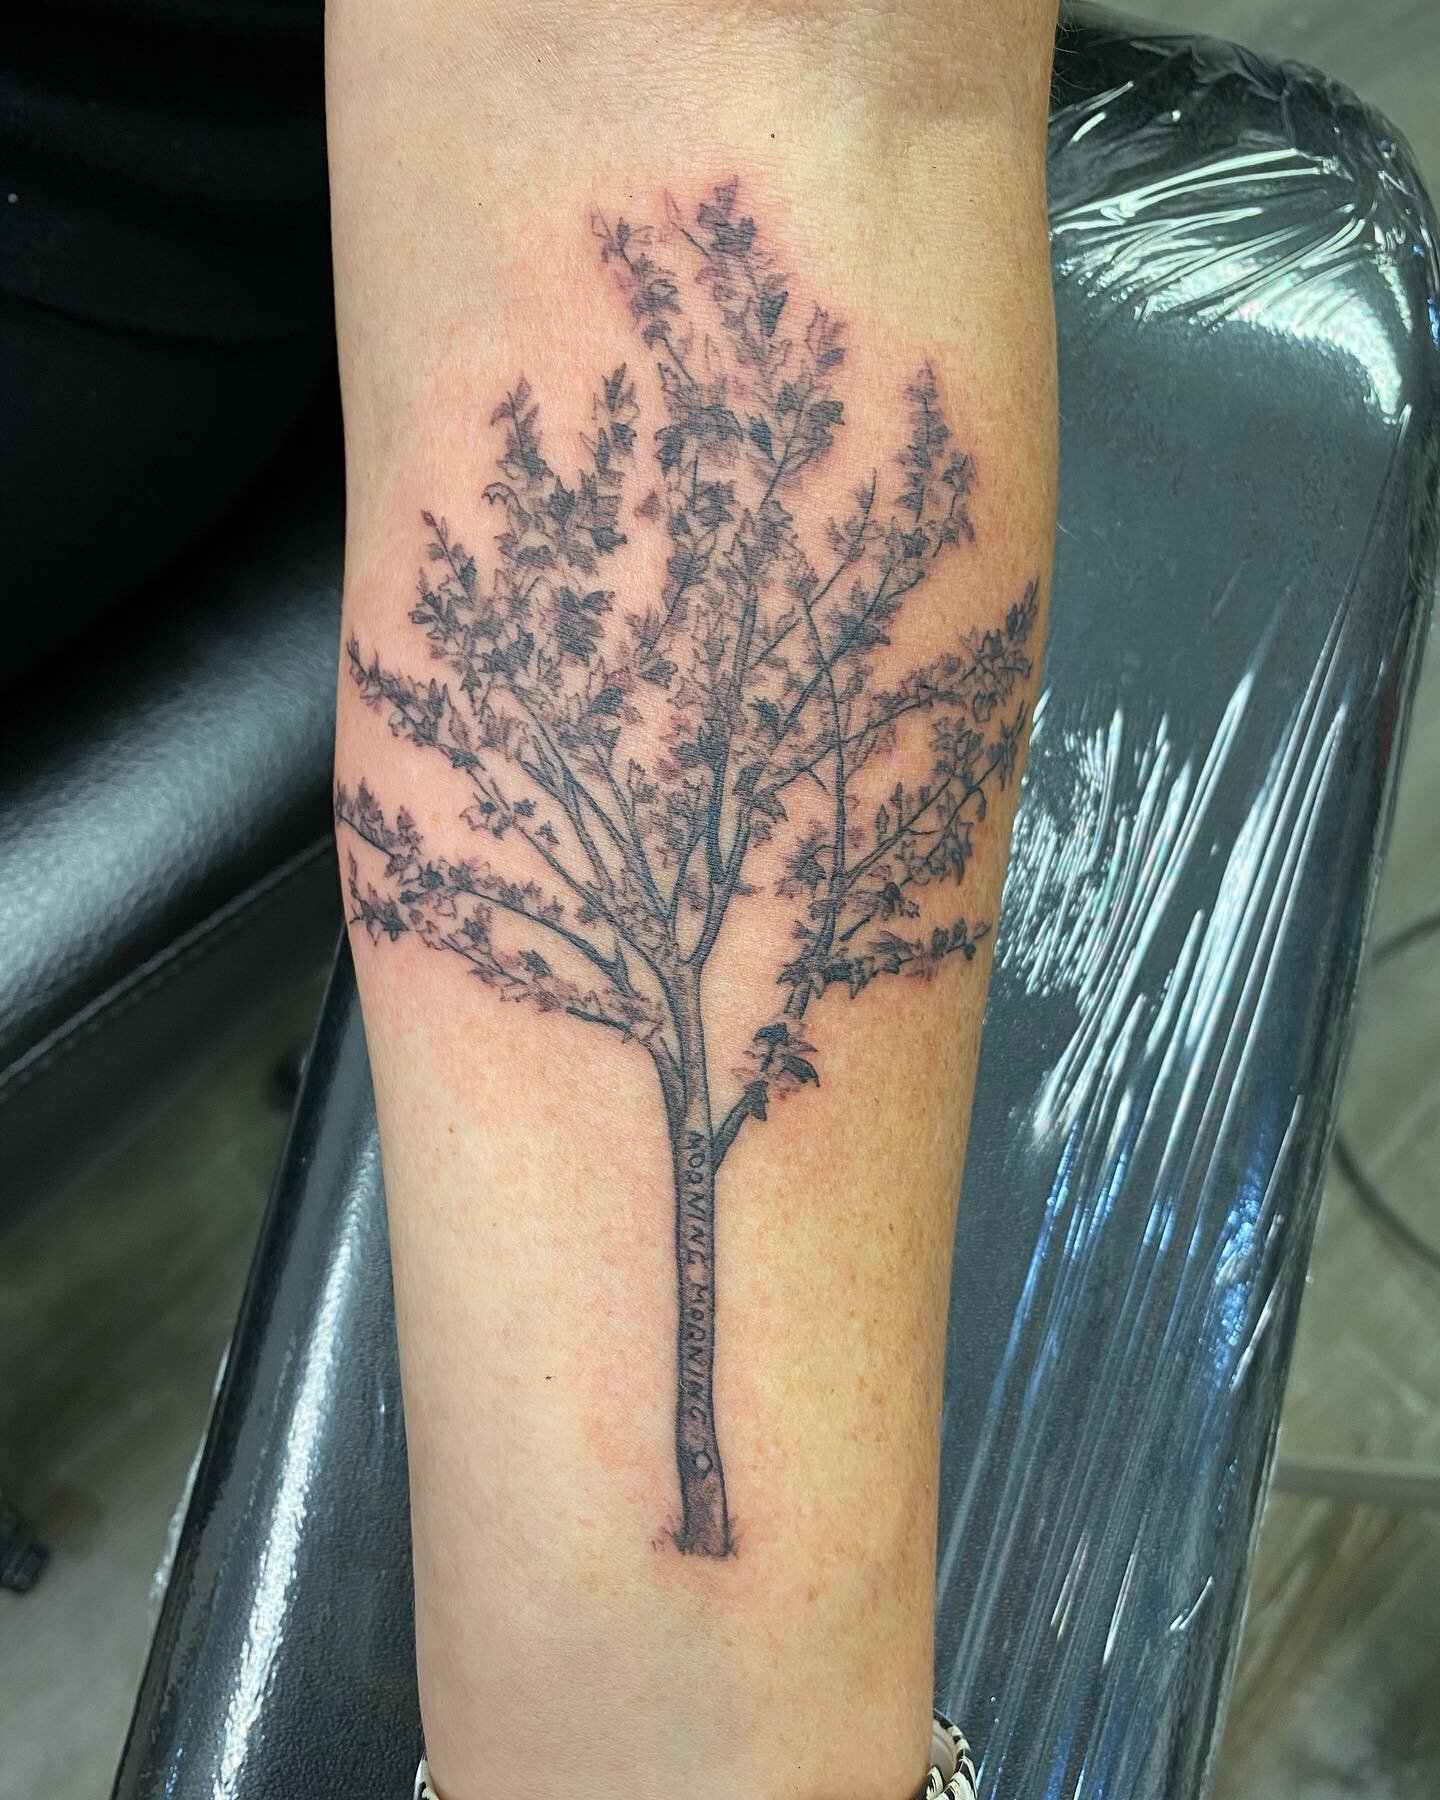 &ldquo;Morning morning&rdquo; An interesting and poetic sounding phrase carved into a tree on a memorial project incorporating some sterilized cremation ashes into the ink. #theedgetattoo #theedgetattooct #southWindsor #manchesterct #tree #trees #ctt